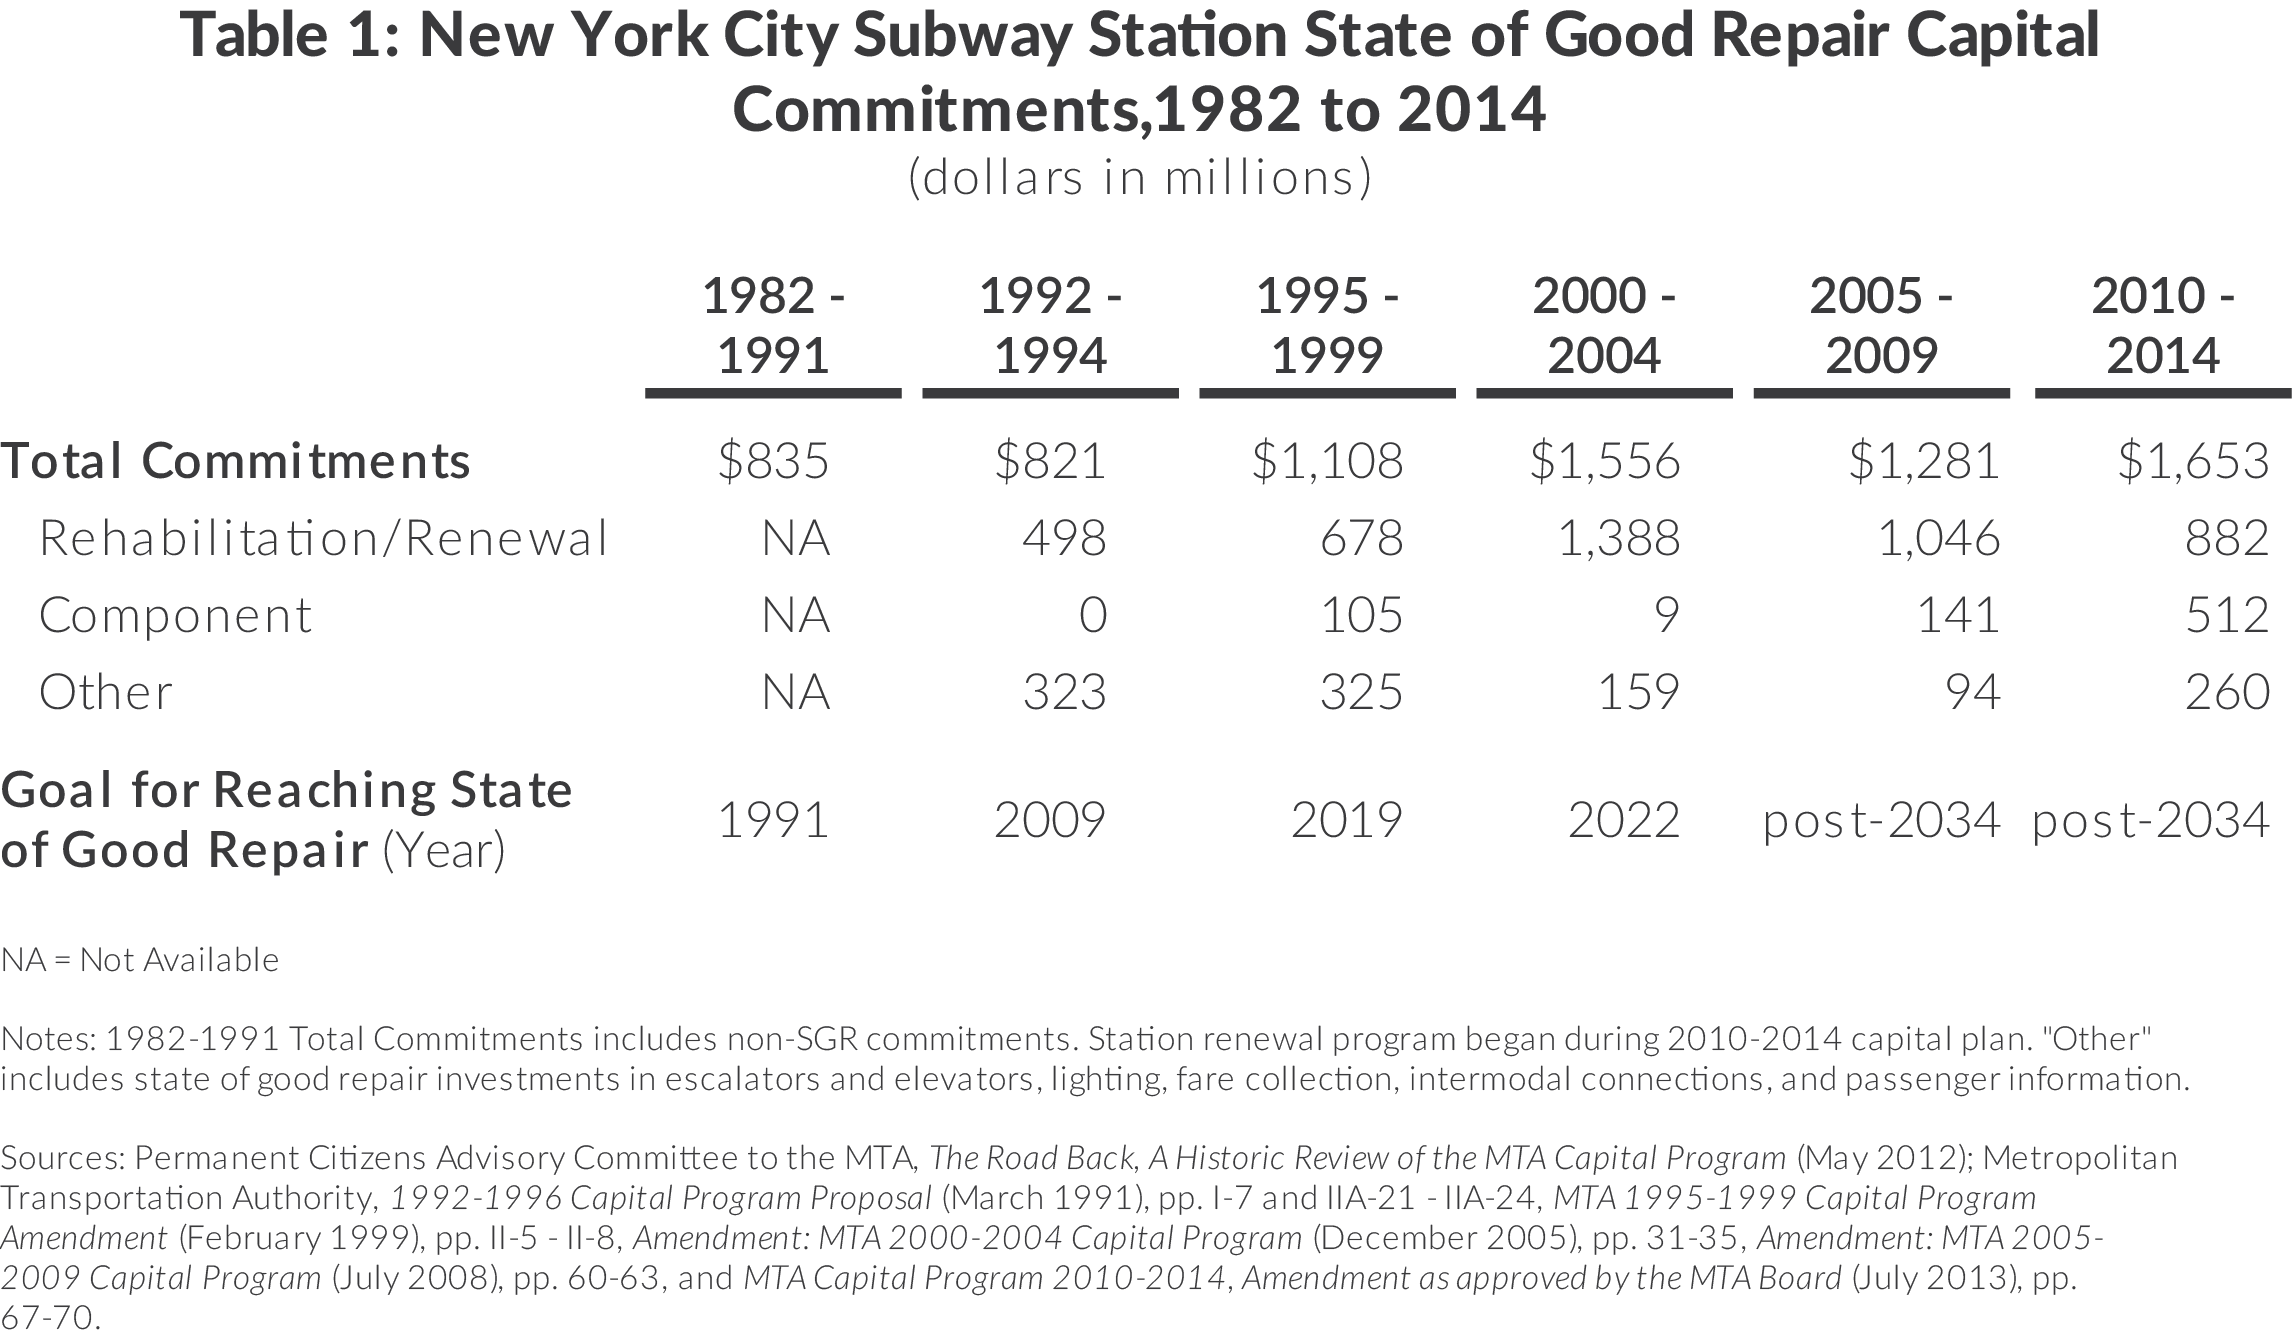 Table showing capital investments in New York City Subway Stations from 1982 to 2014.